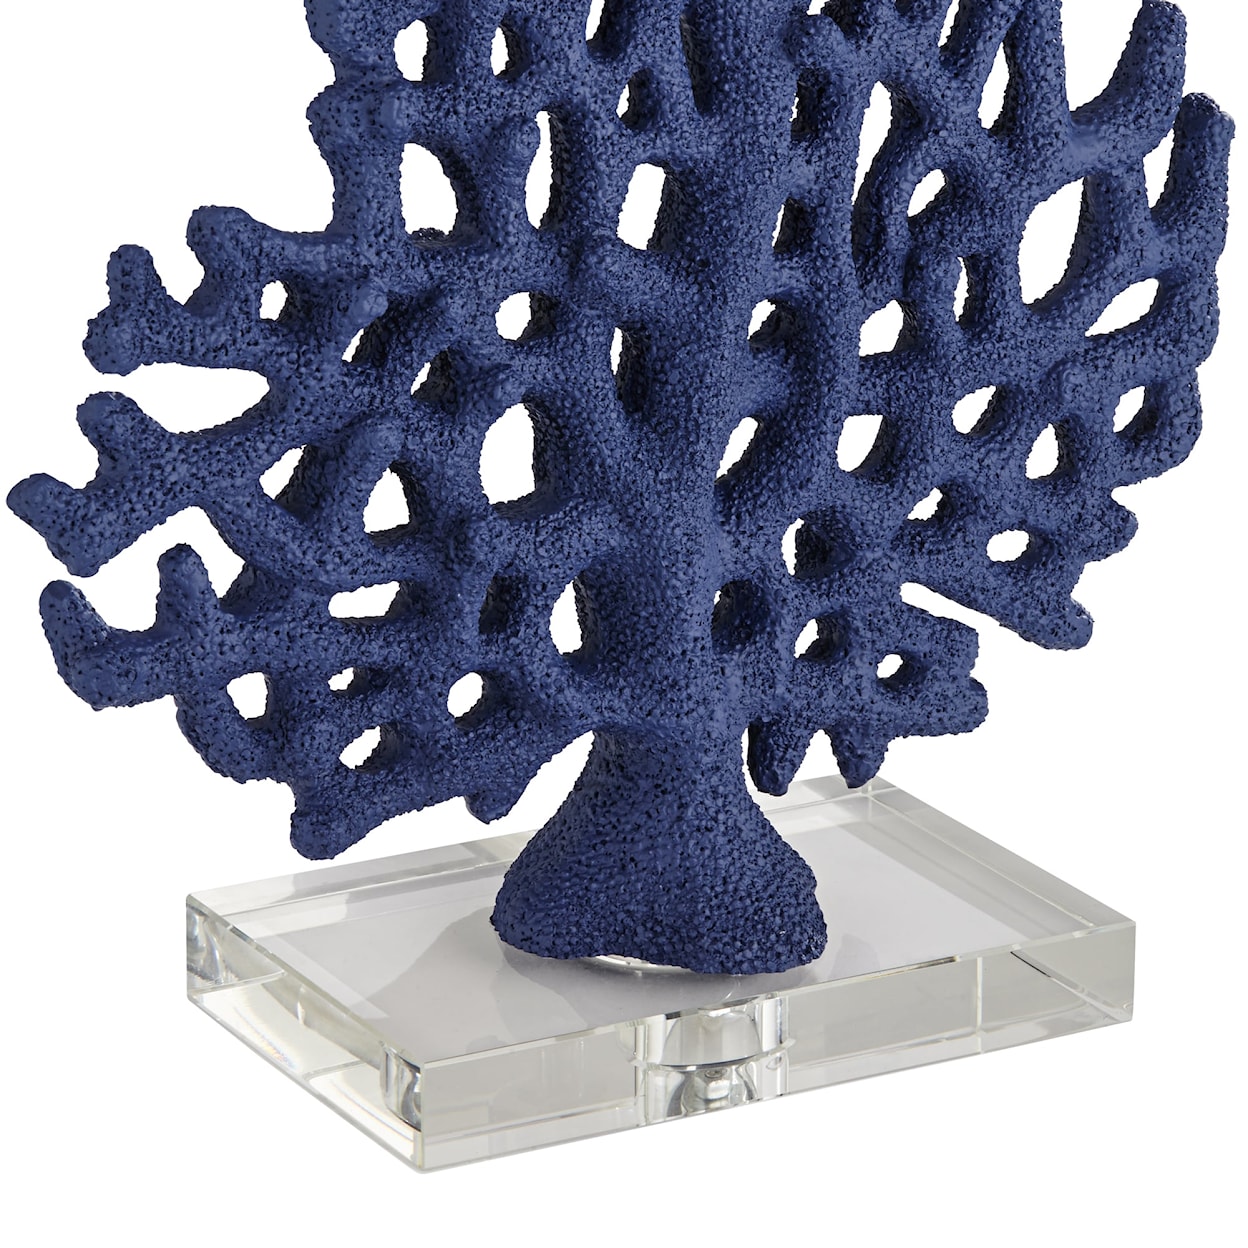 Pacific Coast Lighting Pacific Coast Lighting TL-Poly coral lamp in blue indigo